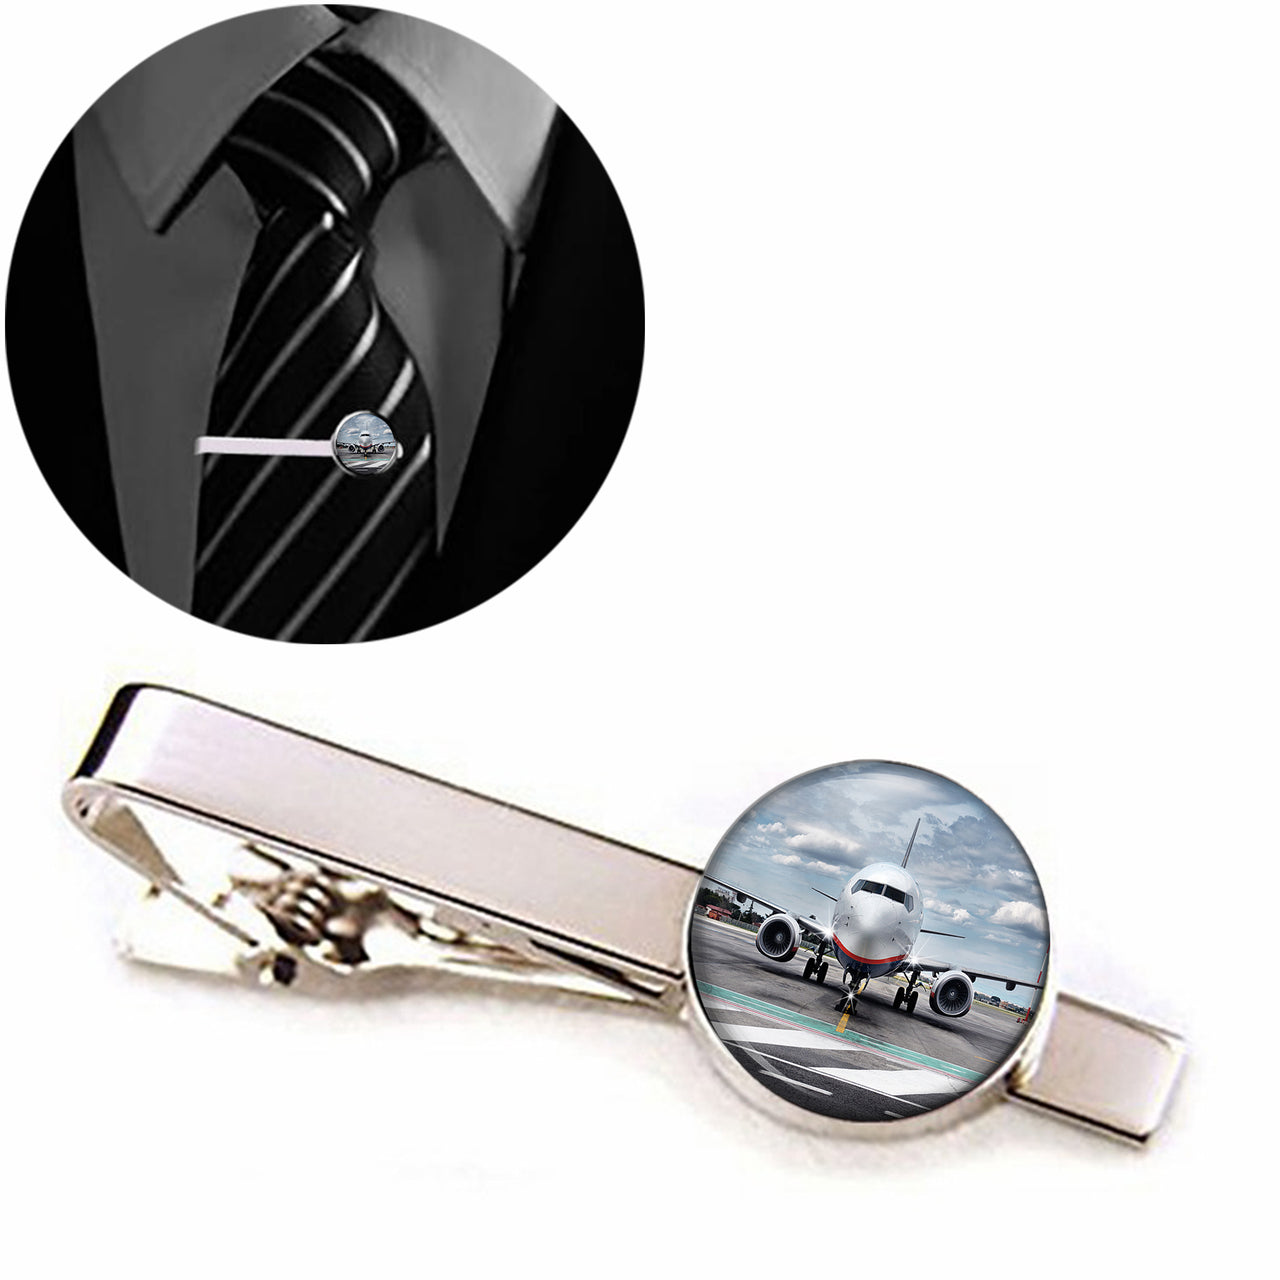 Amazing Clouds and Boeing 737 NG Designed Tie Clips